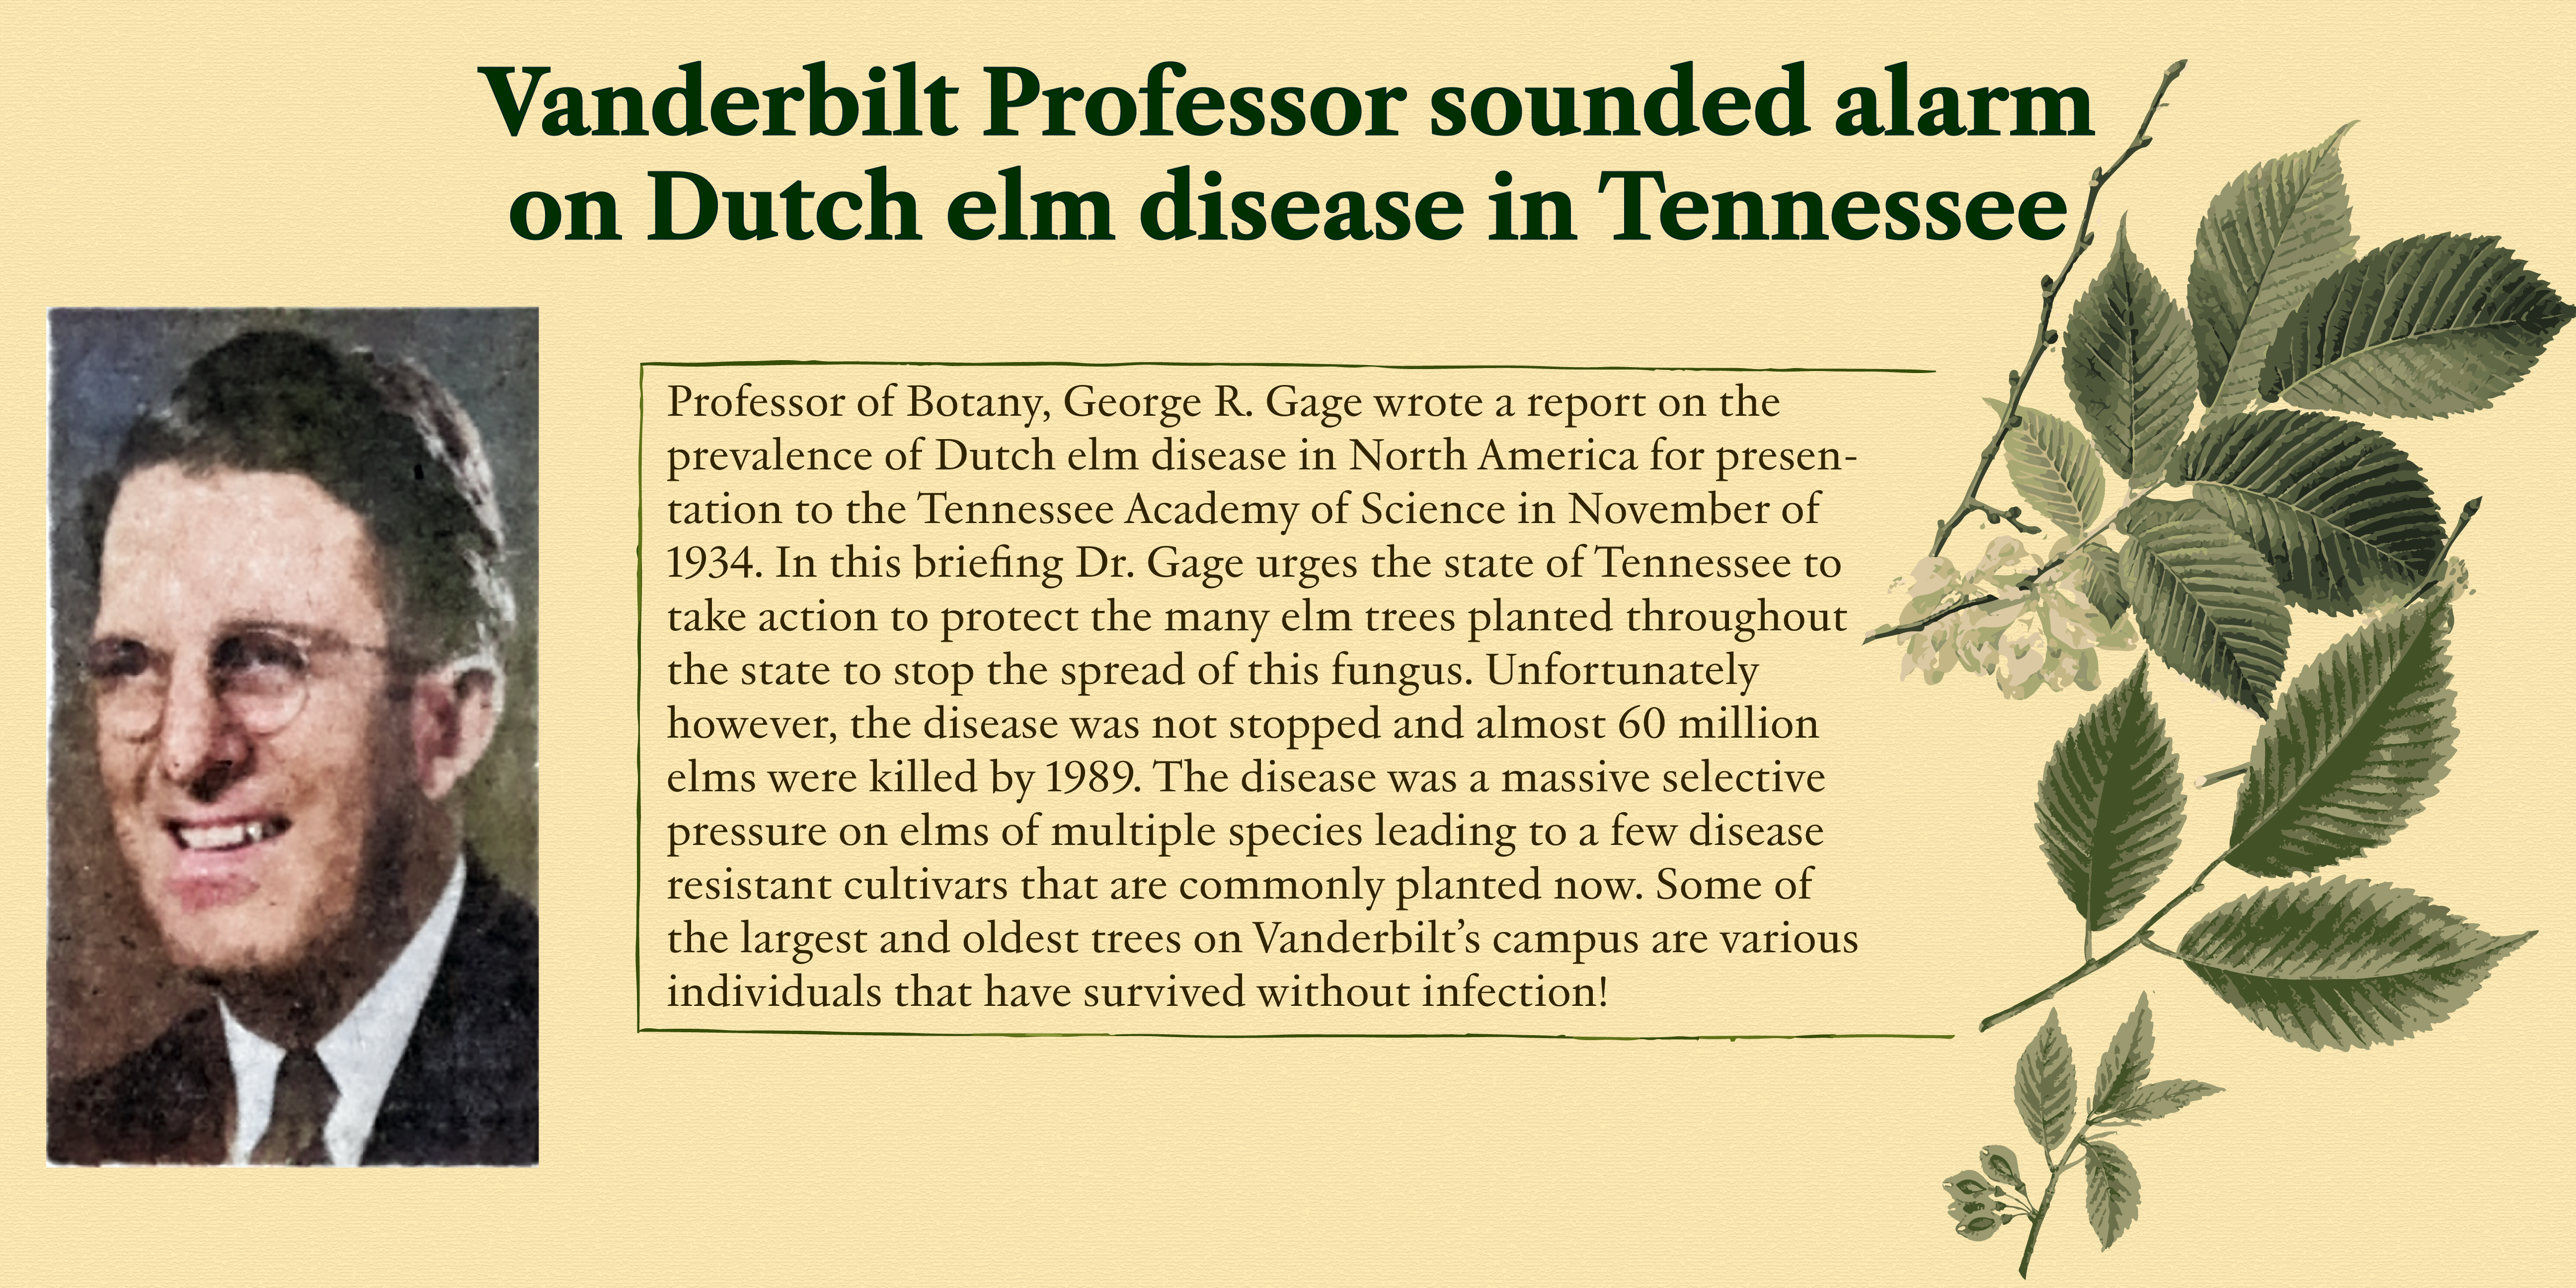 A press release of George Gage's work if it were written today warning of Dutch elm disease - an outbreak that would eventually kill millions of Tennessee trees.